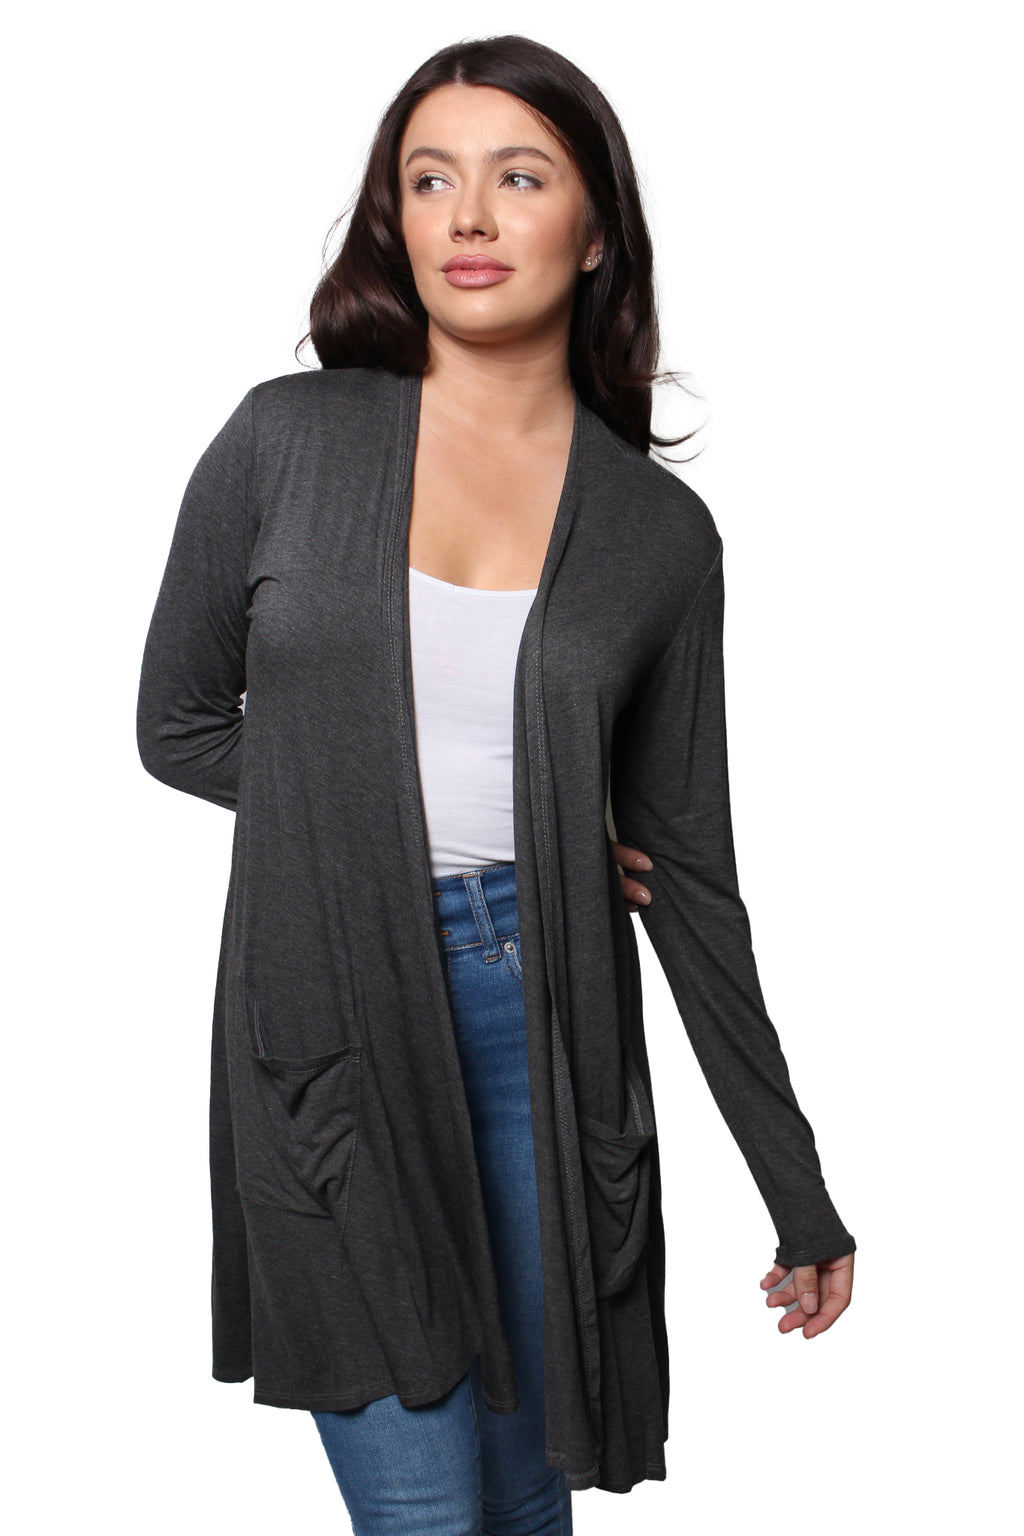 Women’s Long Sleeve Front Pocket Knitted Cardigan